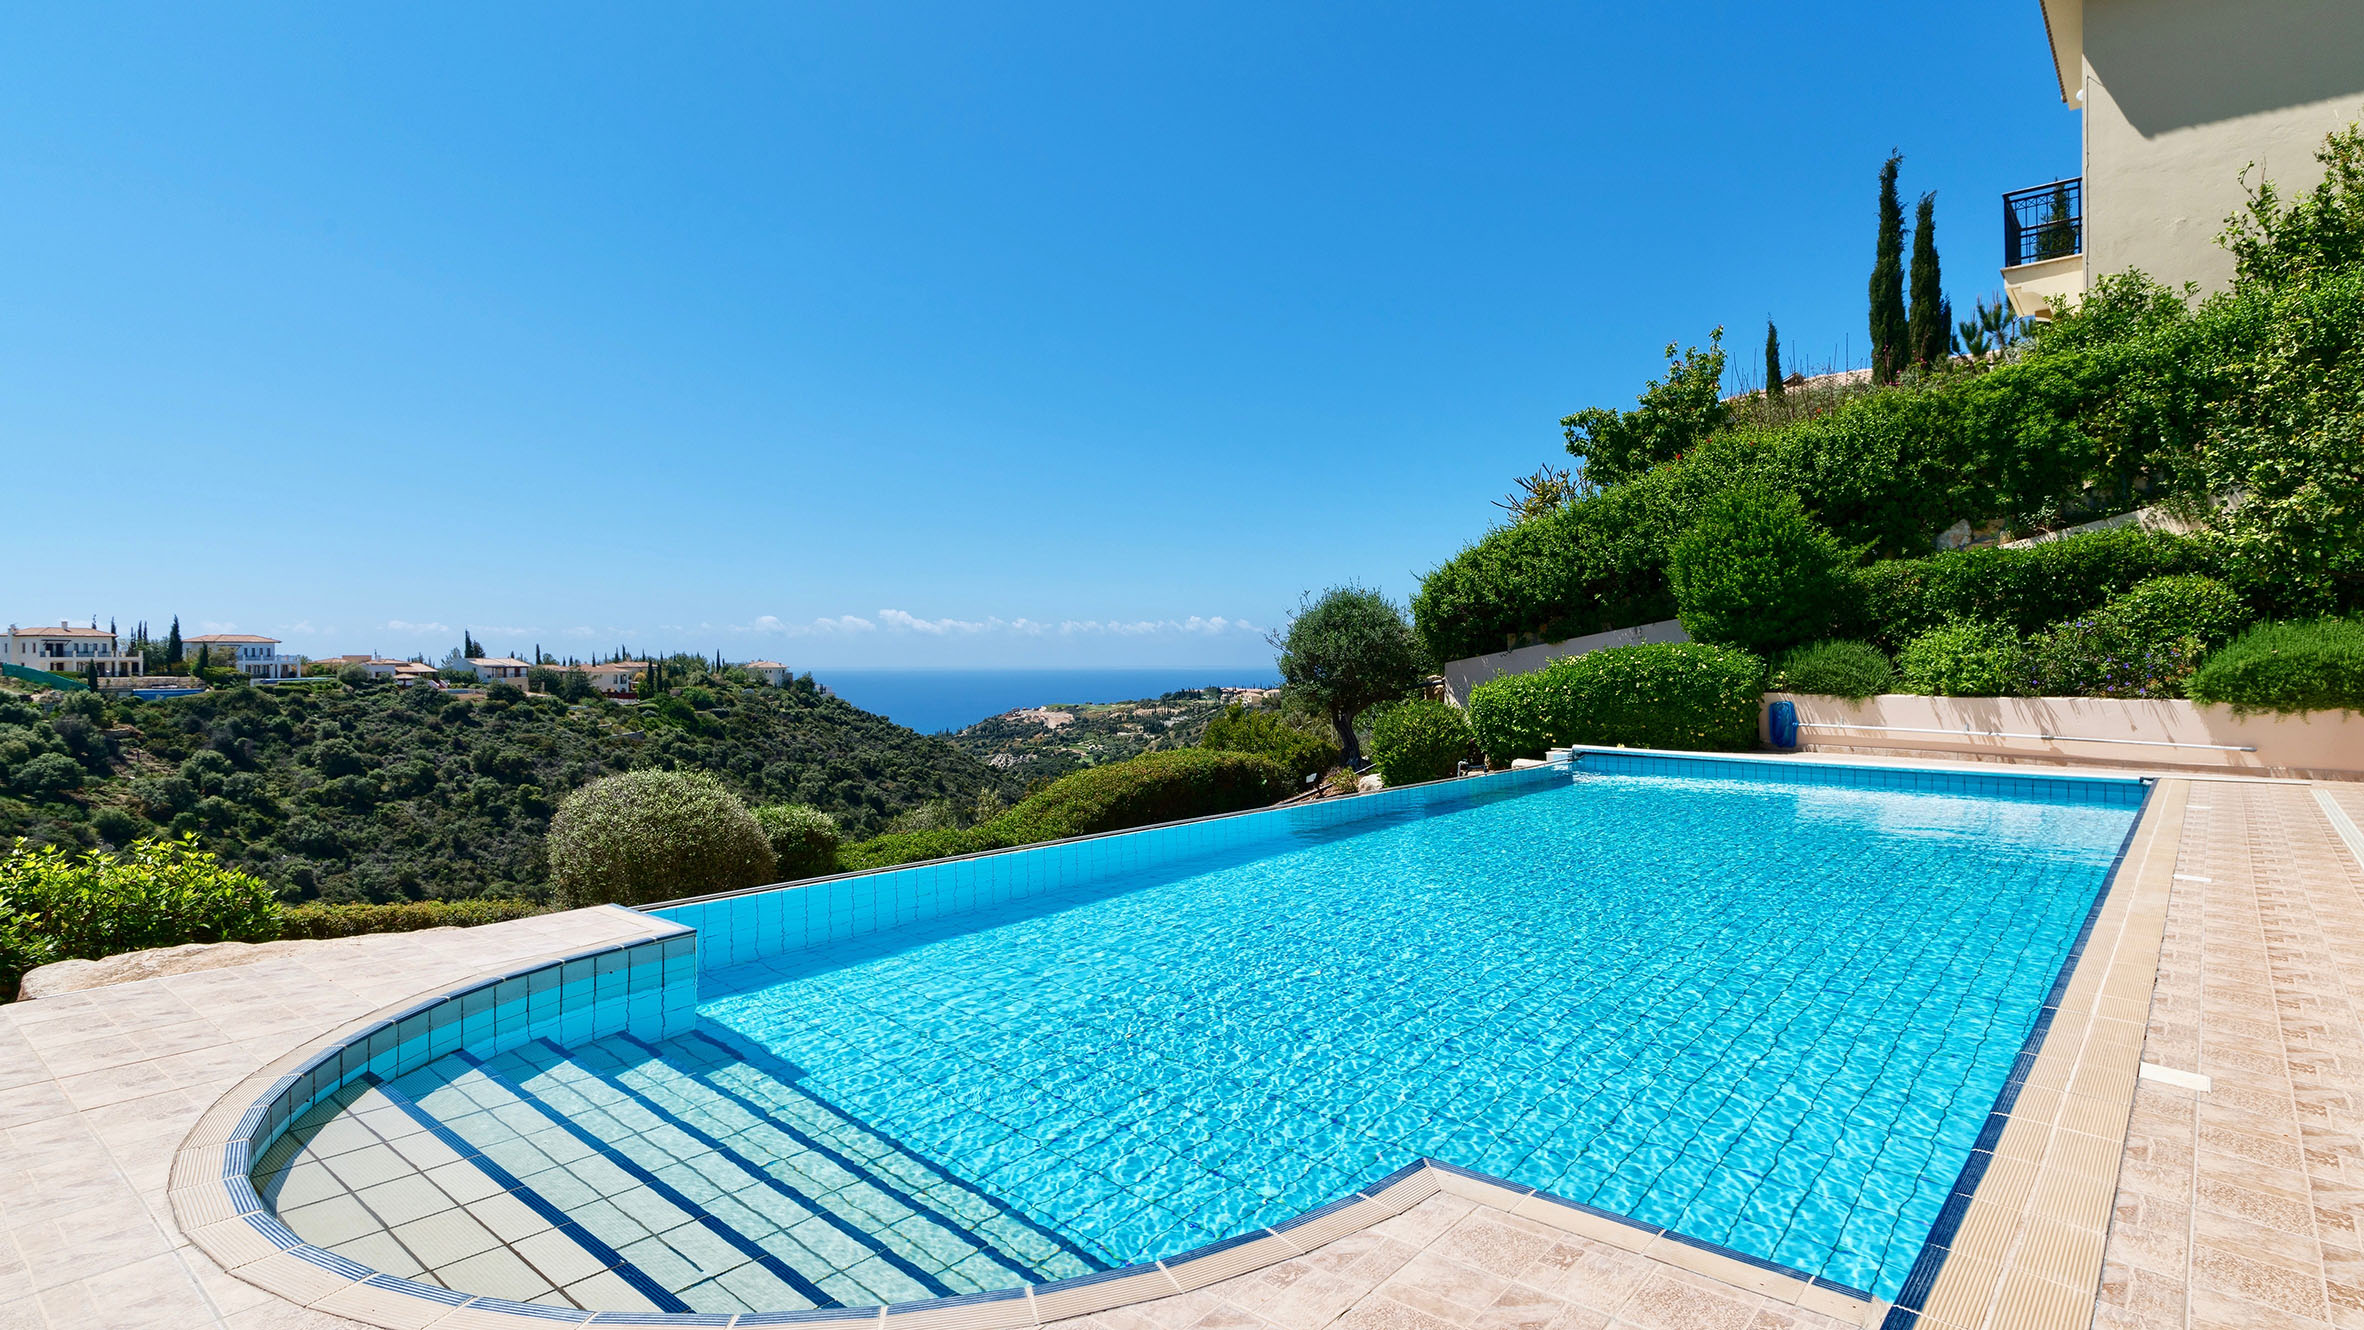 Image of pool and view from pool at Villa Helidoni 98 on Aphrodite Hills Resort.